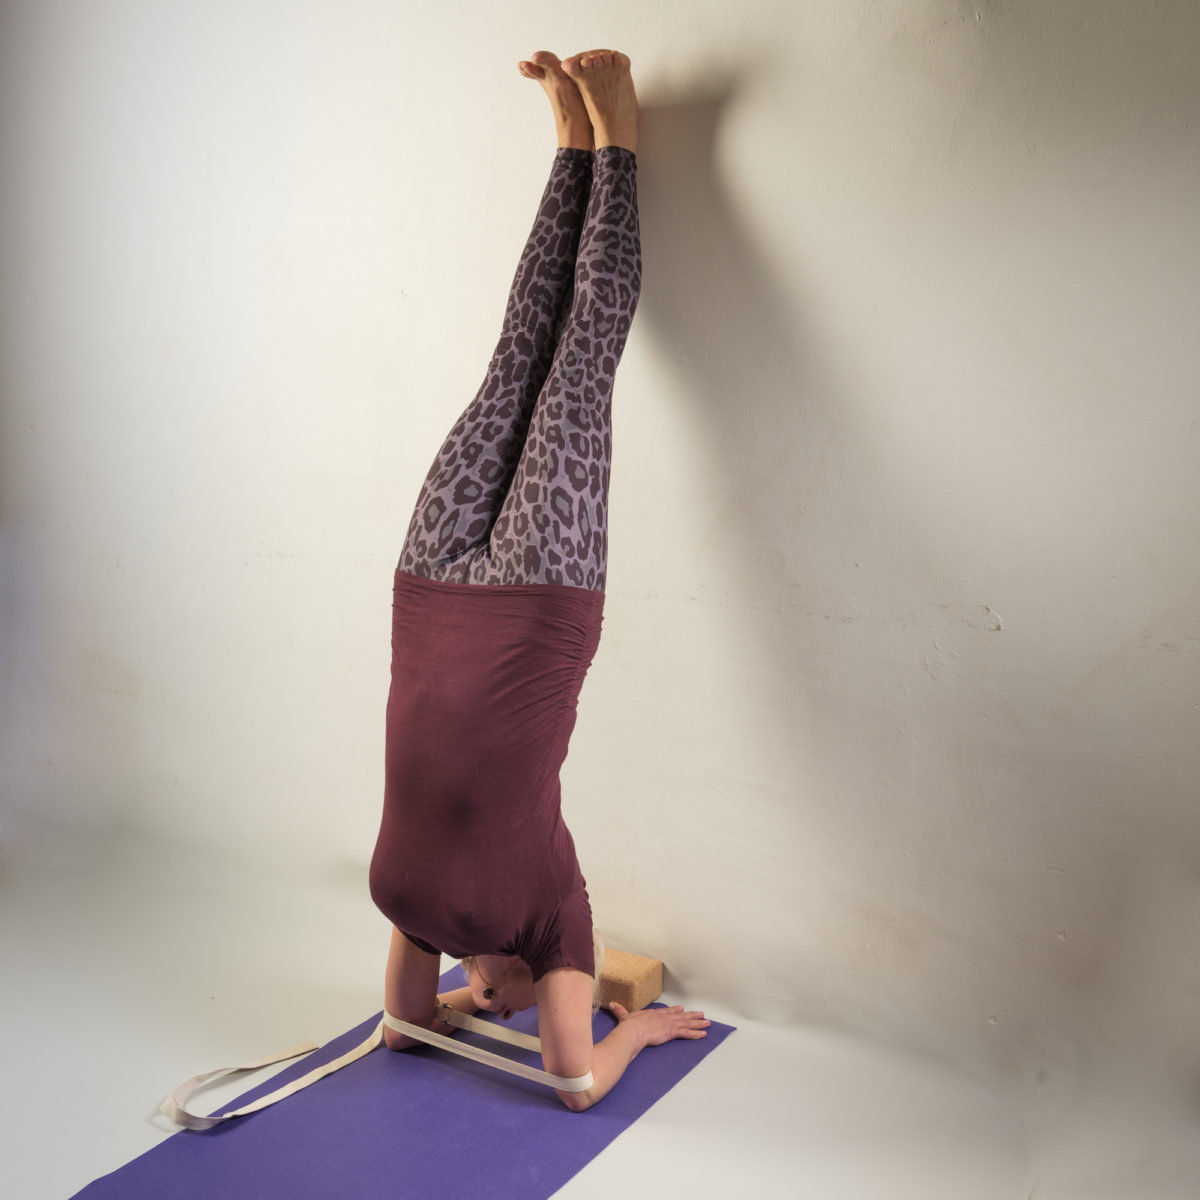 Understanding Props - How to Use a Yoga Strap - Blog - Yogamatters